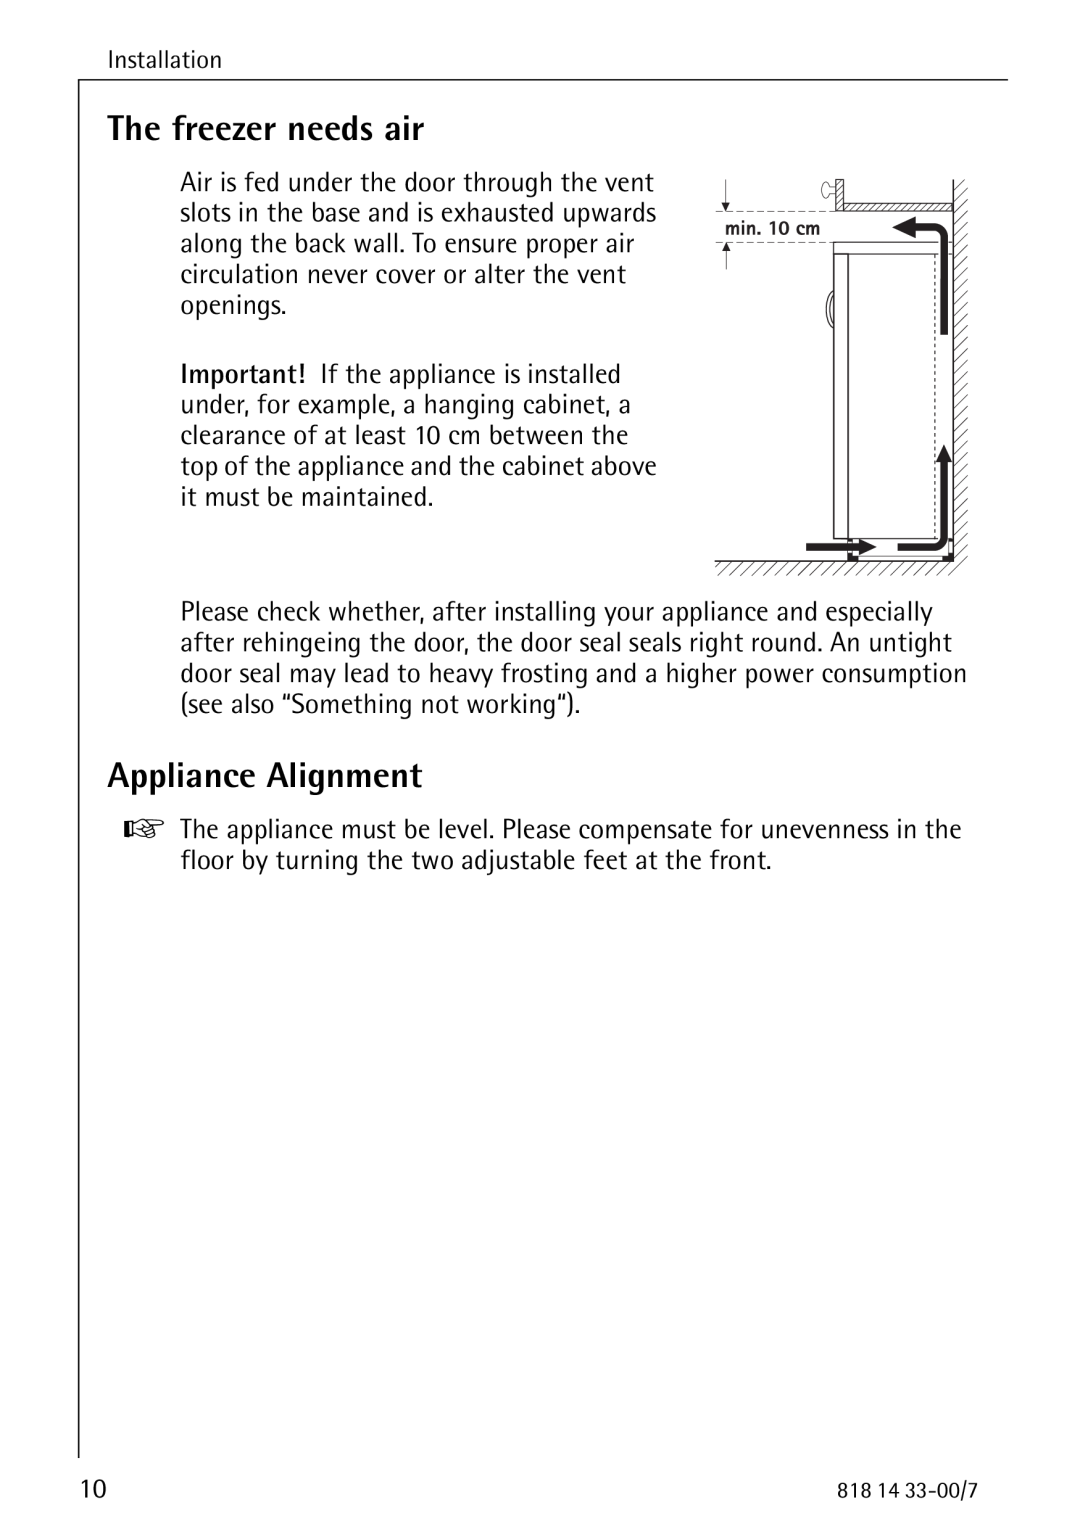 Electrolux 2170-4 operating instructions The freezer needs air, Appliance Alignment, Installation 